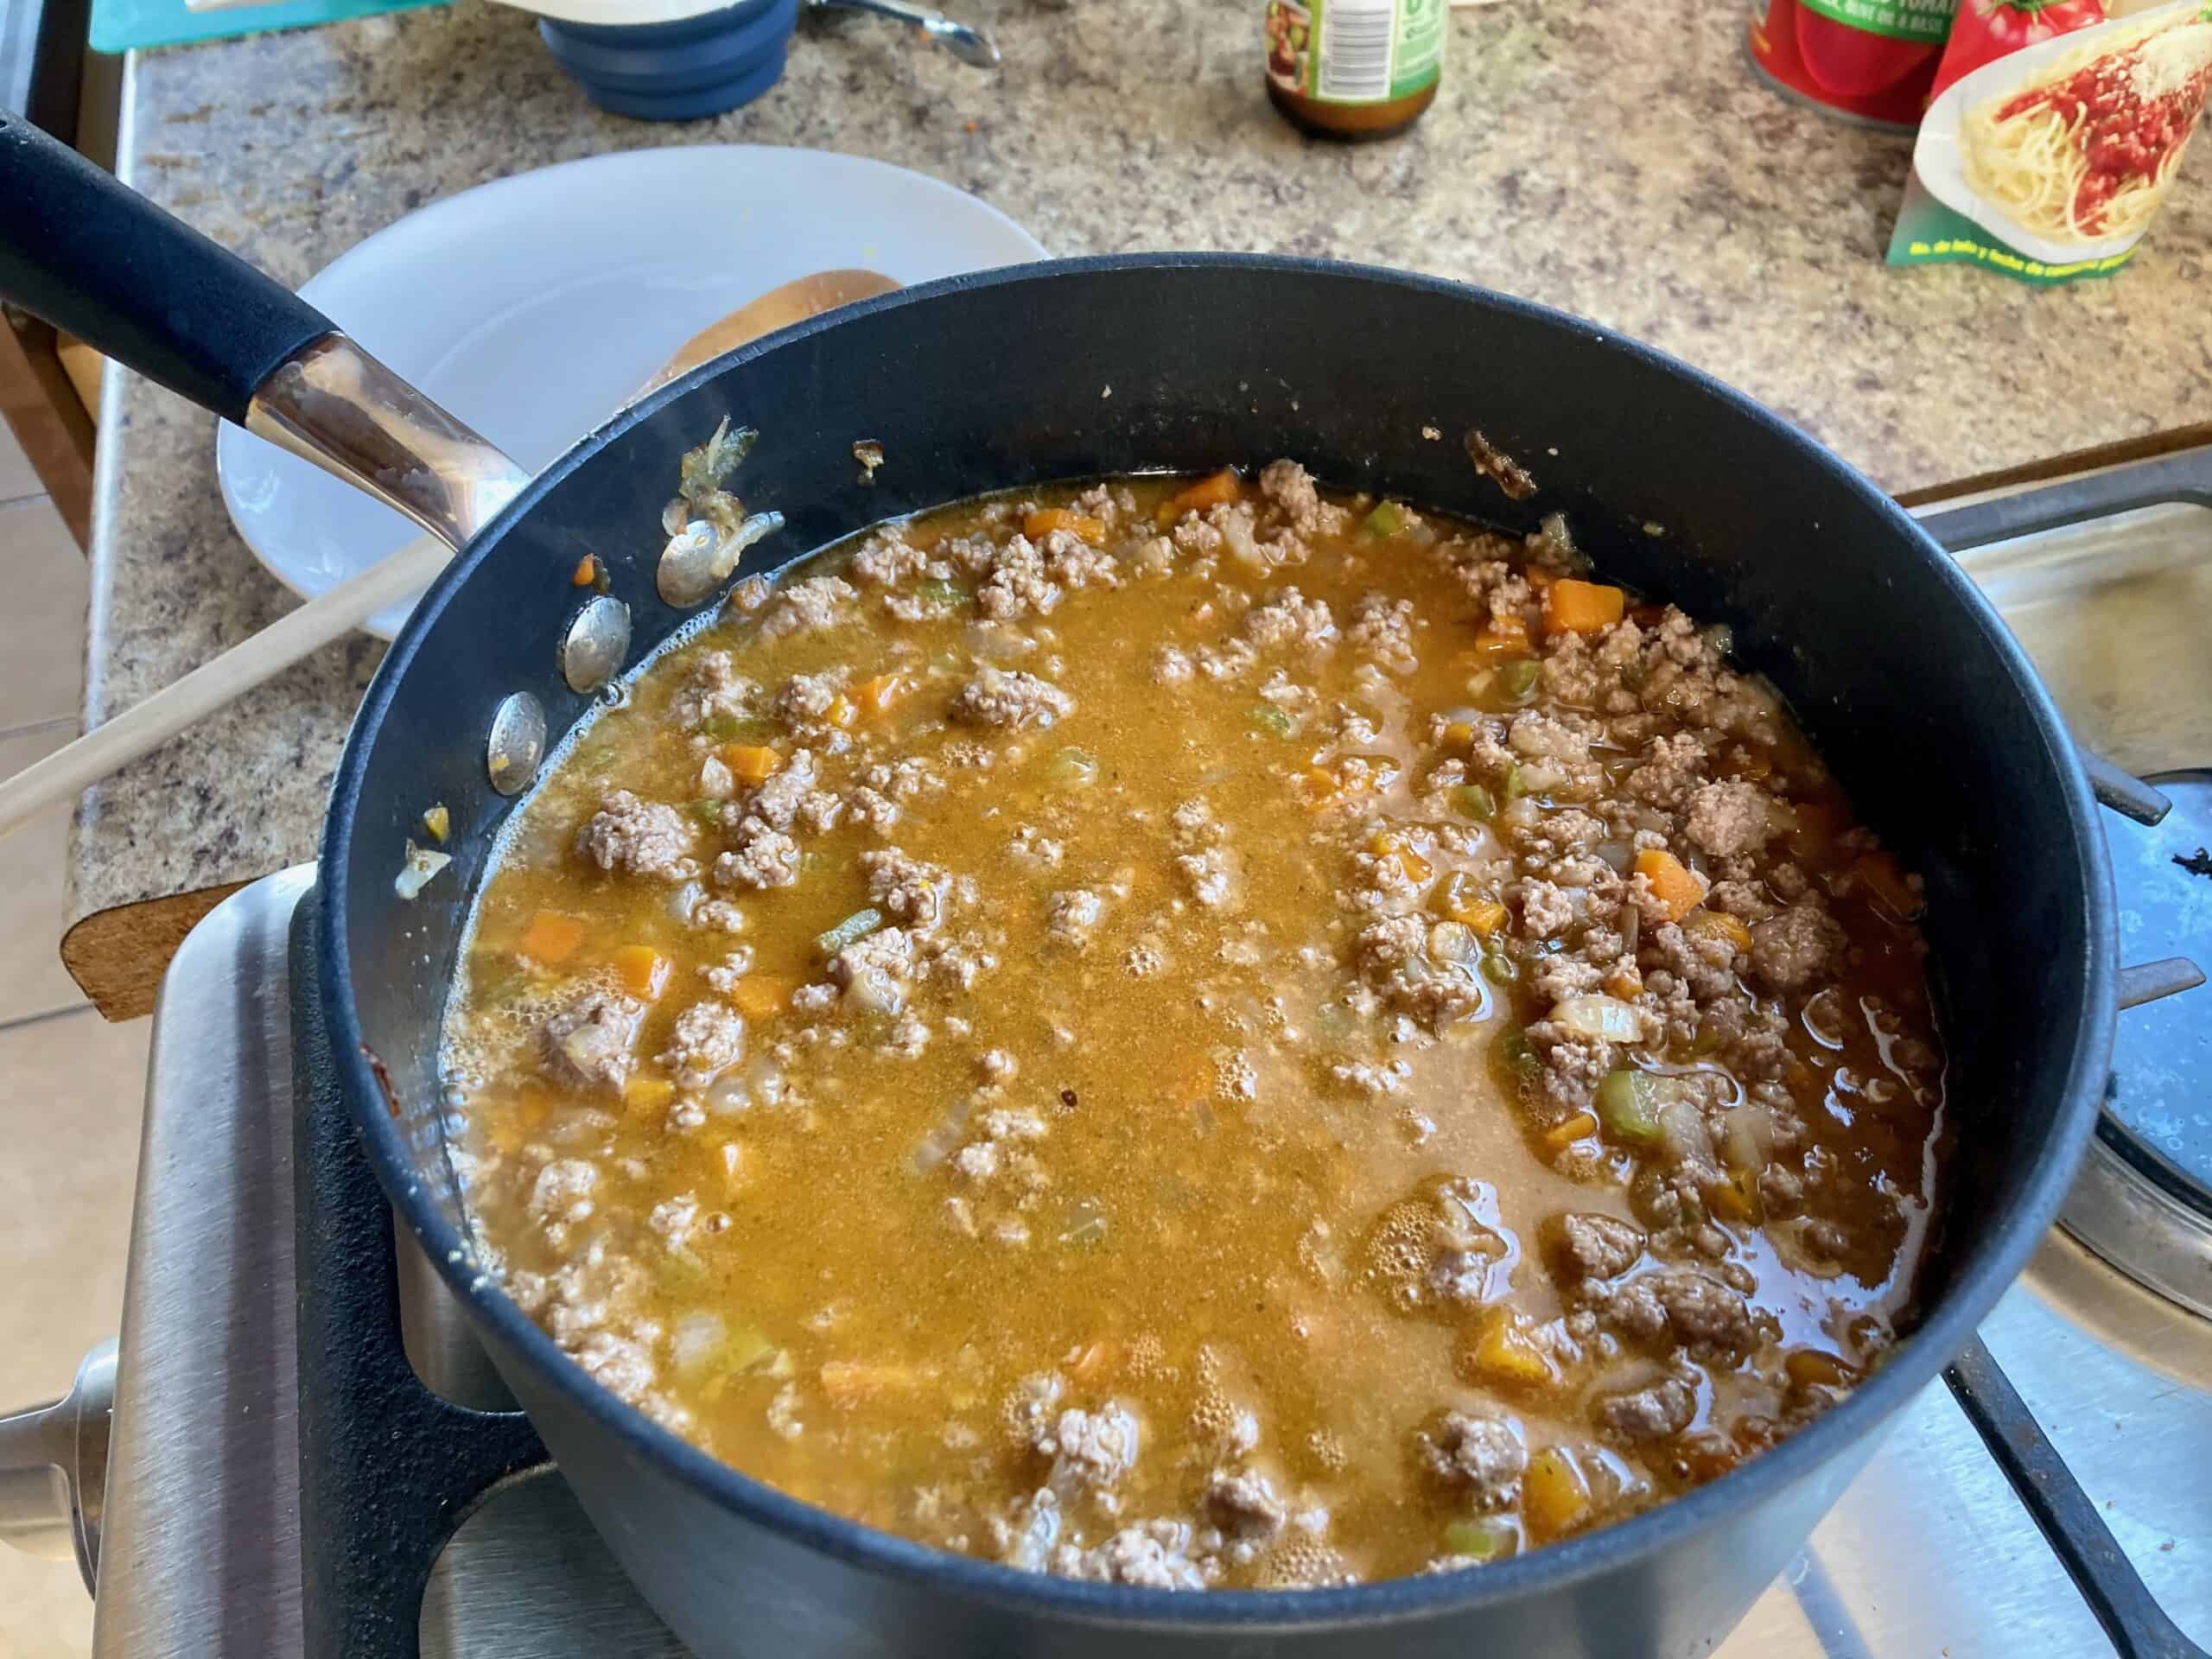 Turkey Bolognese Sauce in large saucepan on the stove.